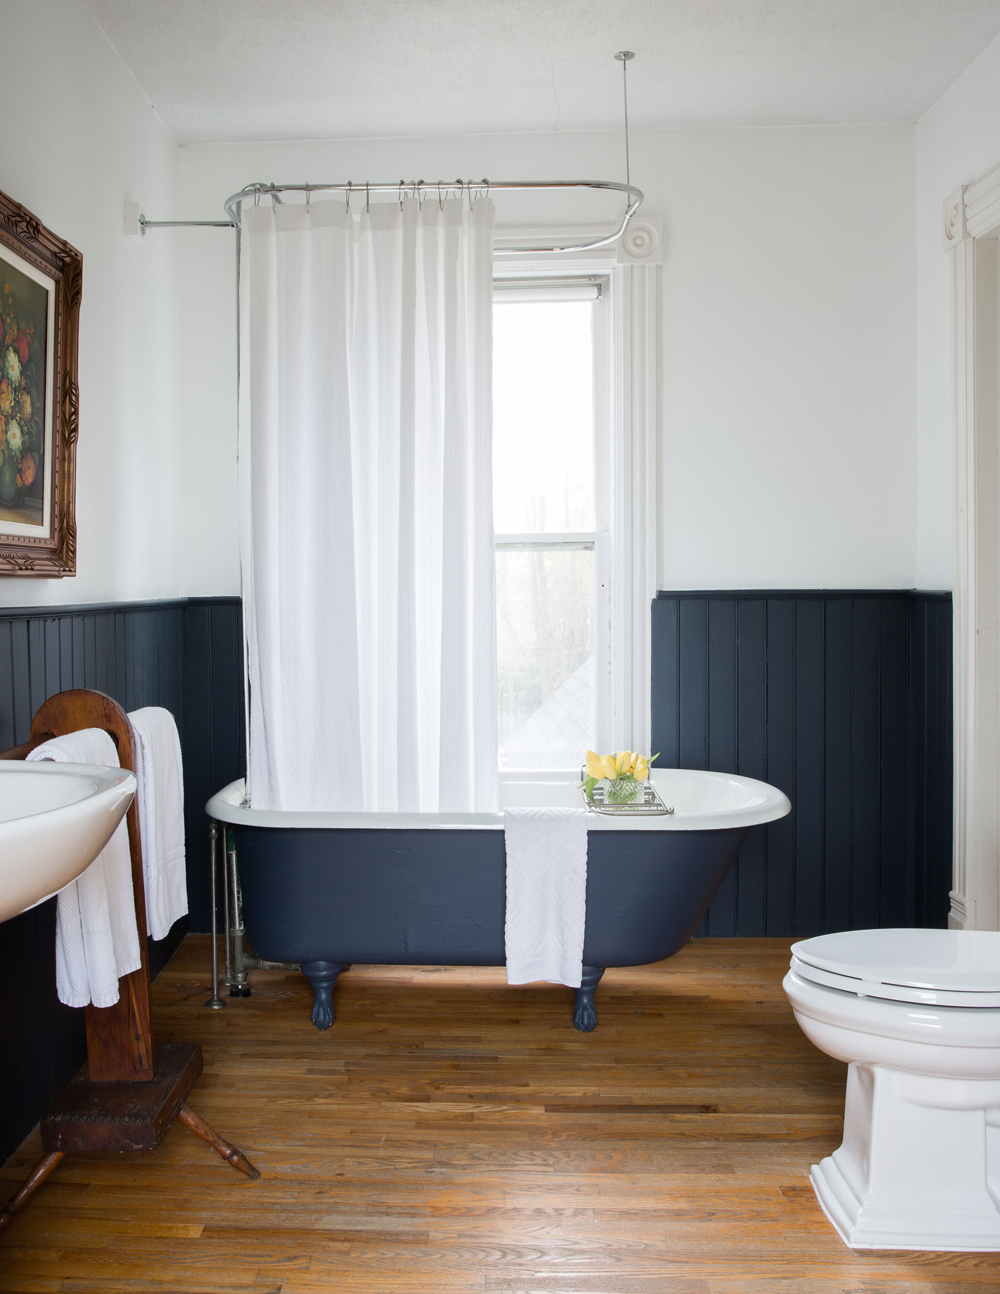 A renovated home with wood flooring, midnight blue walls and a clawfoot tub